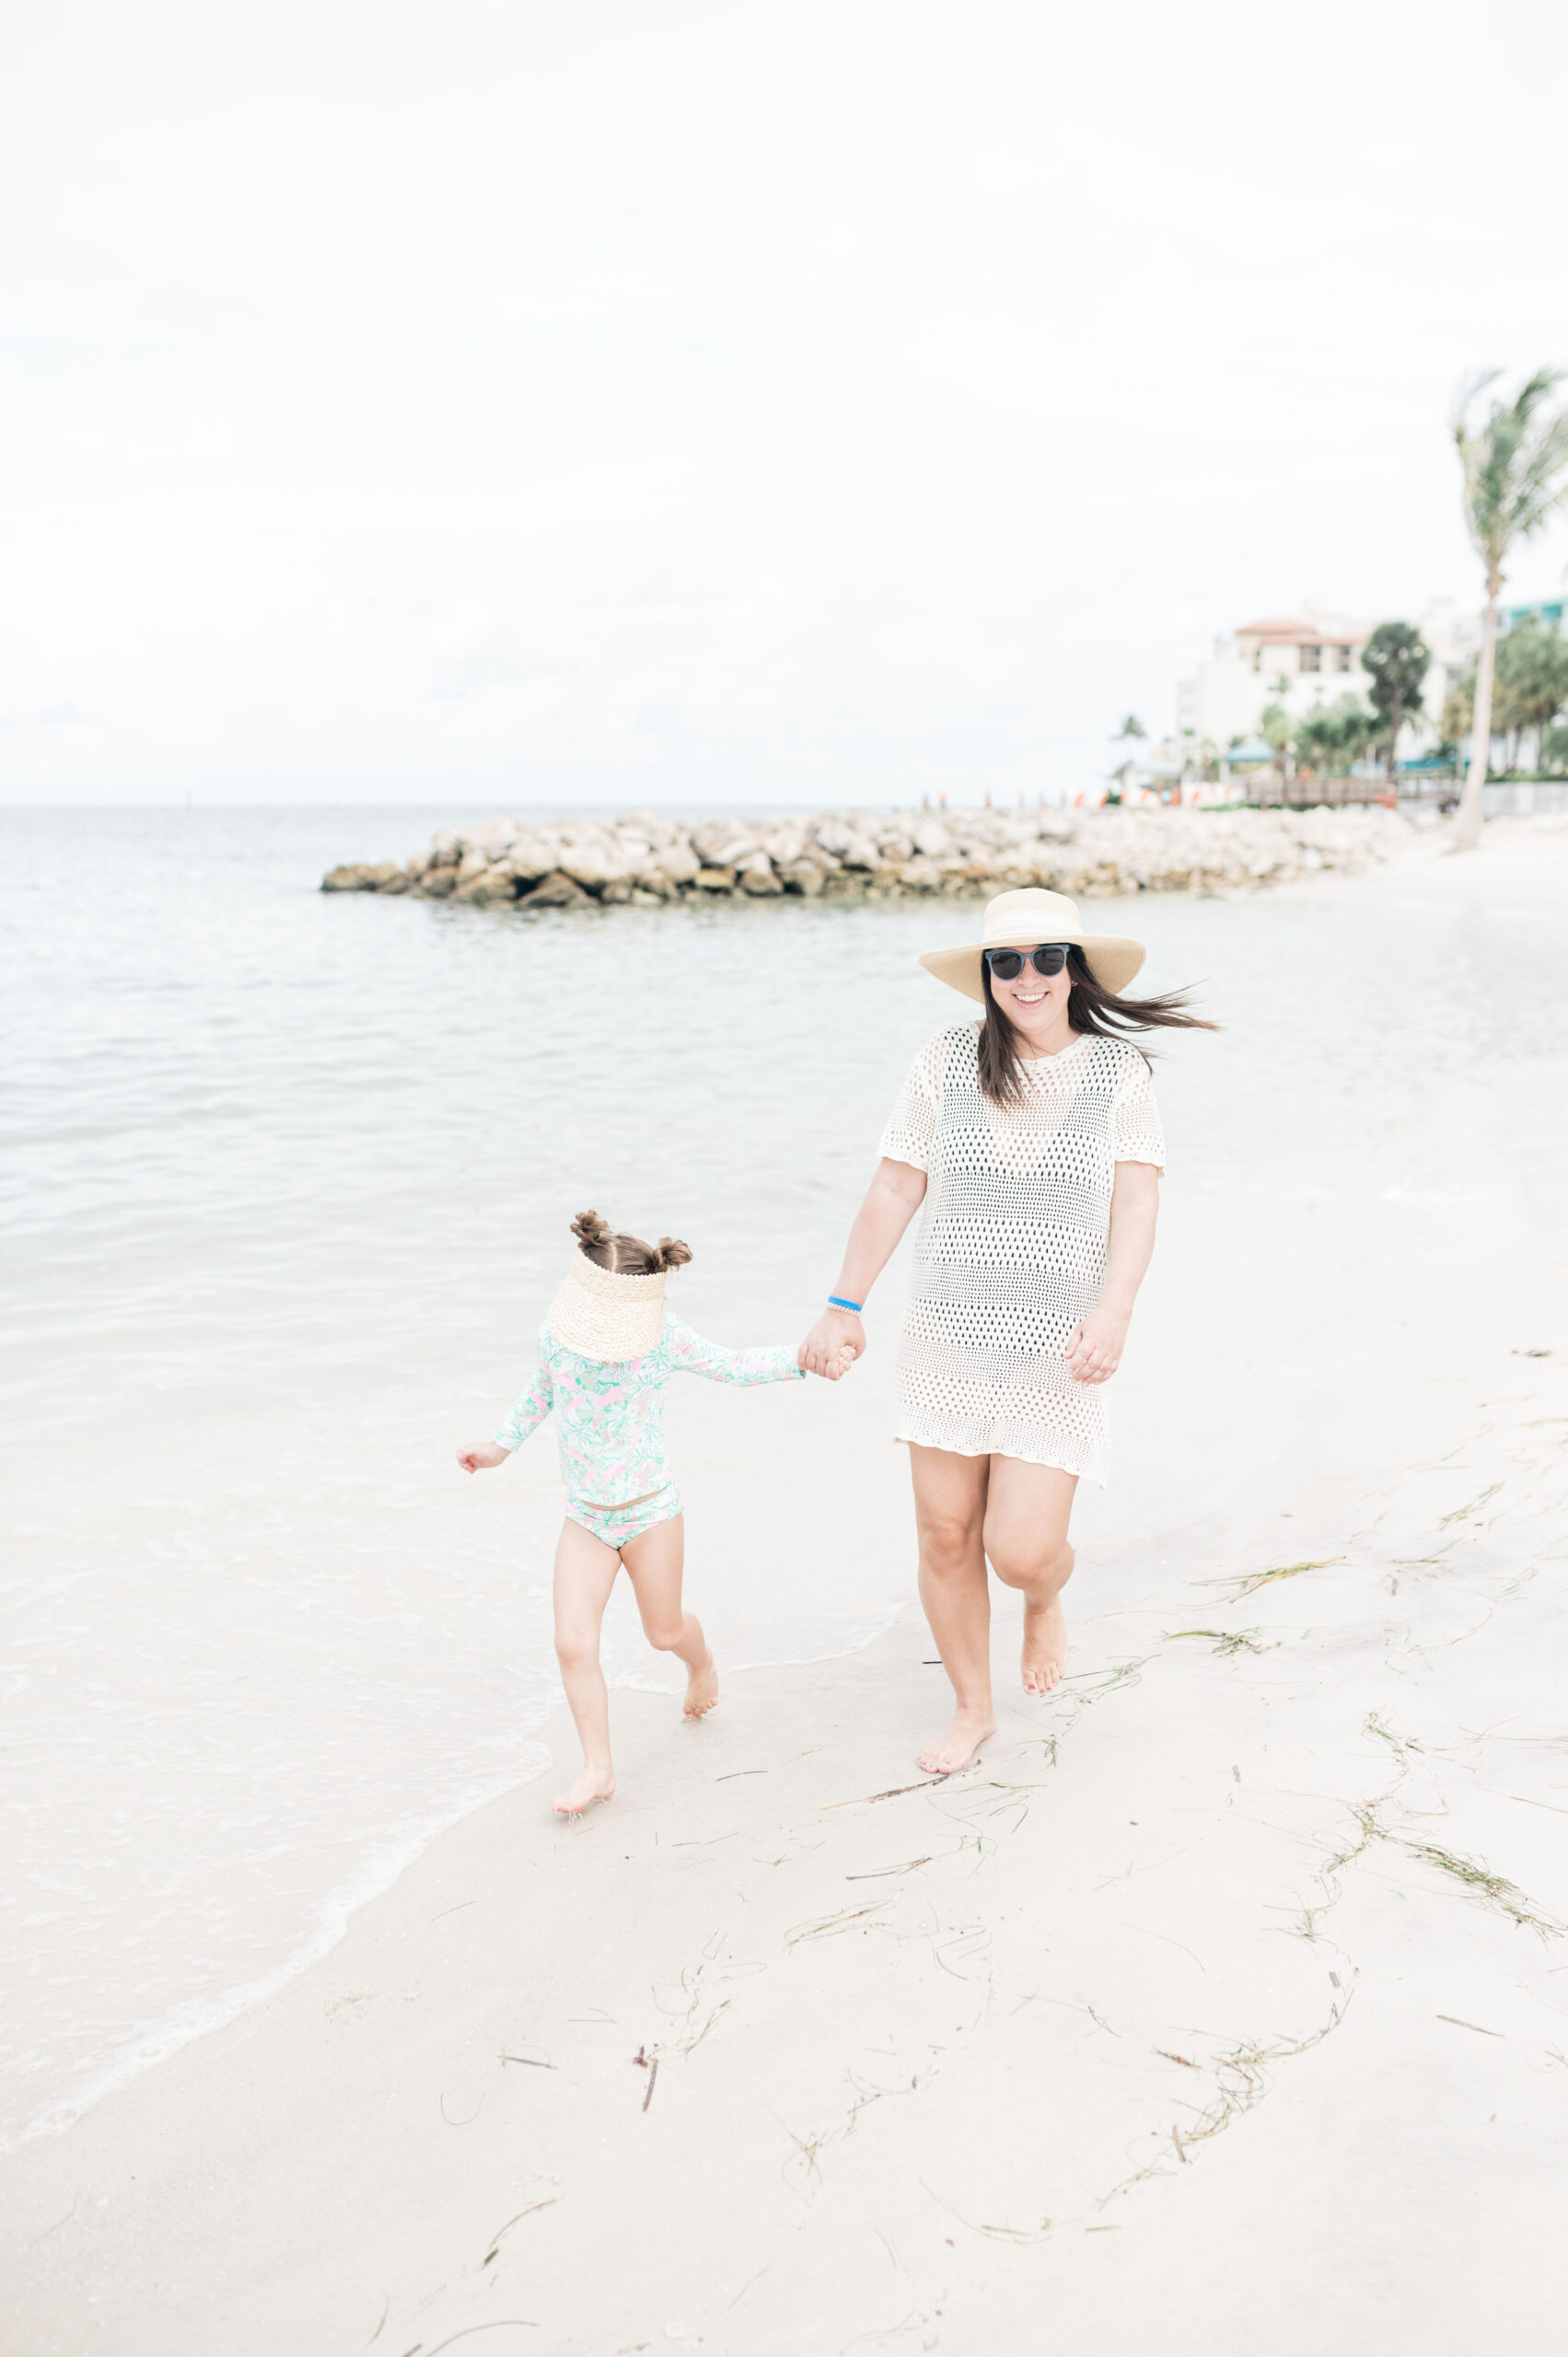 Brittney Naylor holding daughter's hand jogging on the best beach resort in Clearwater Beach, Florida.